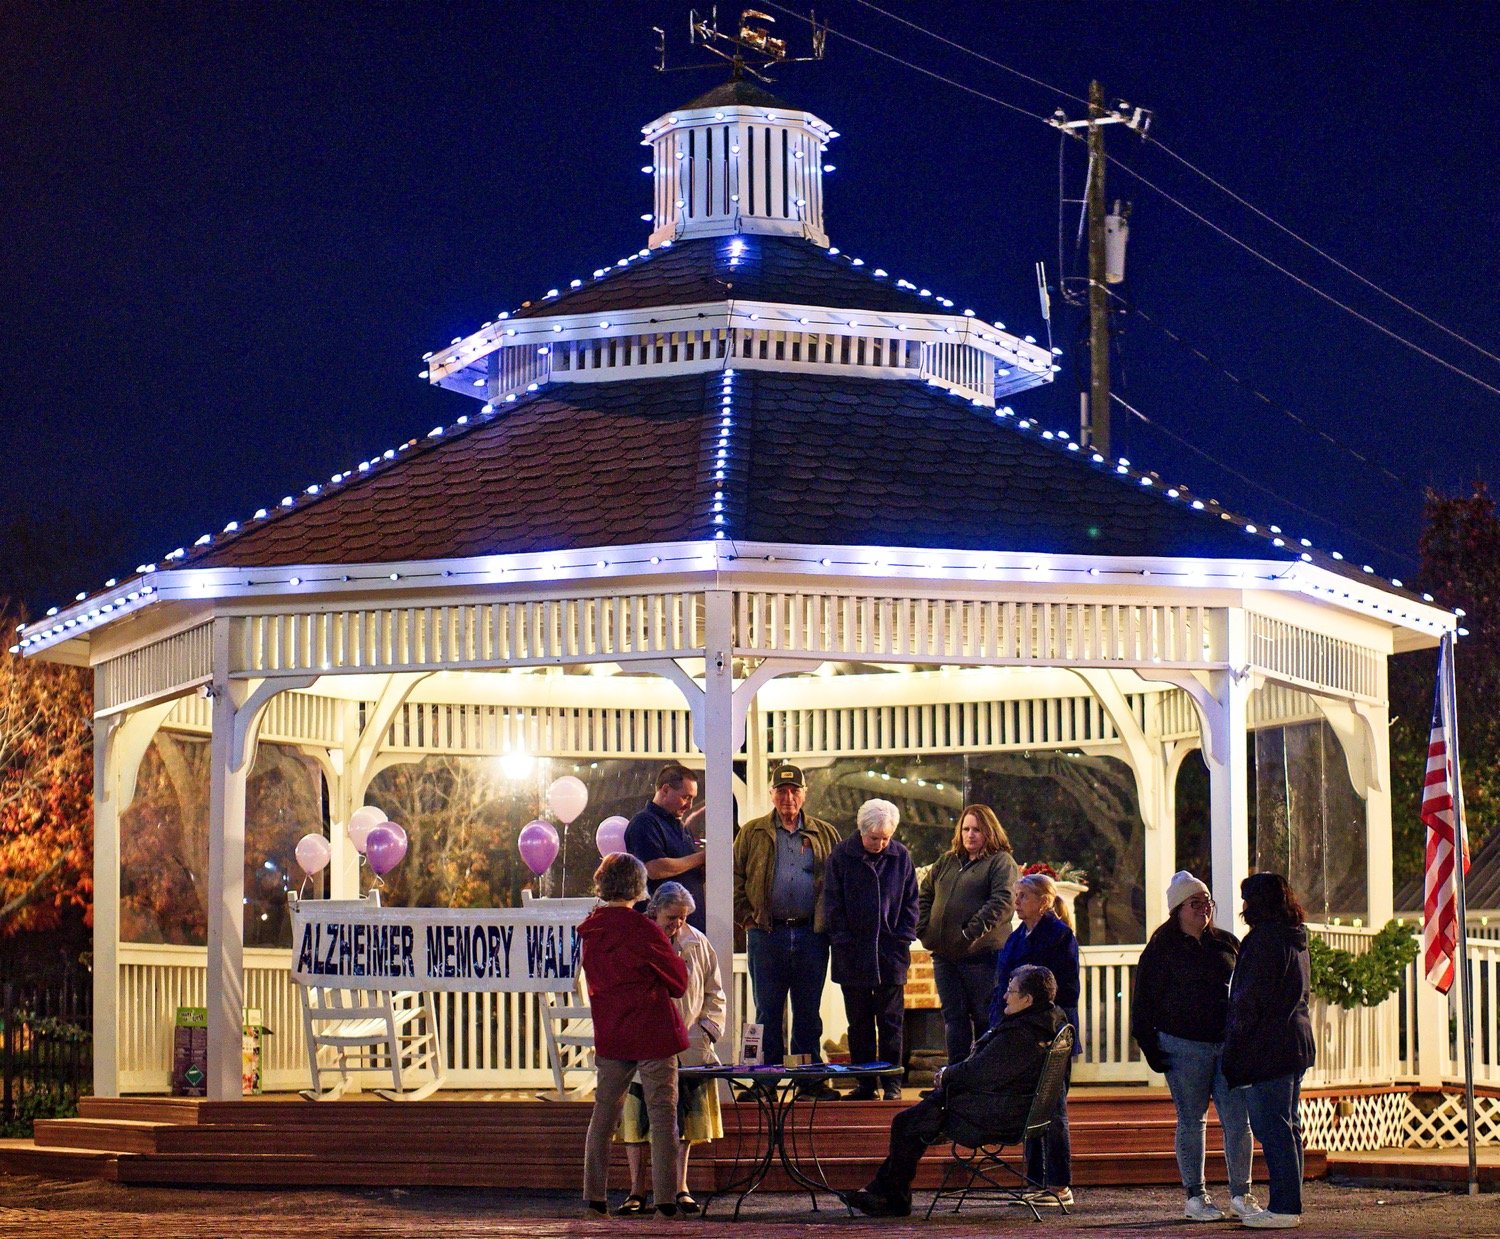 Folks gather at the gazebo in downtown Mineola for the annual event honoring those with Alzheimer's. [see the candlelight ceremony]